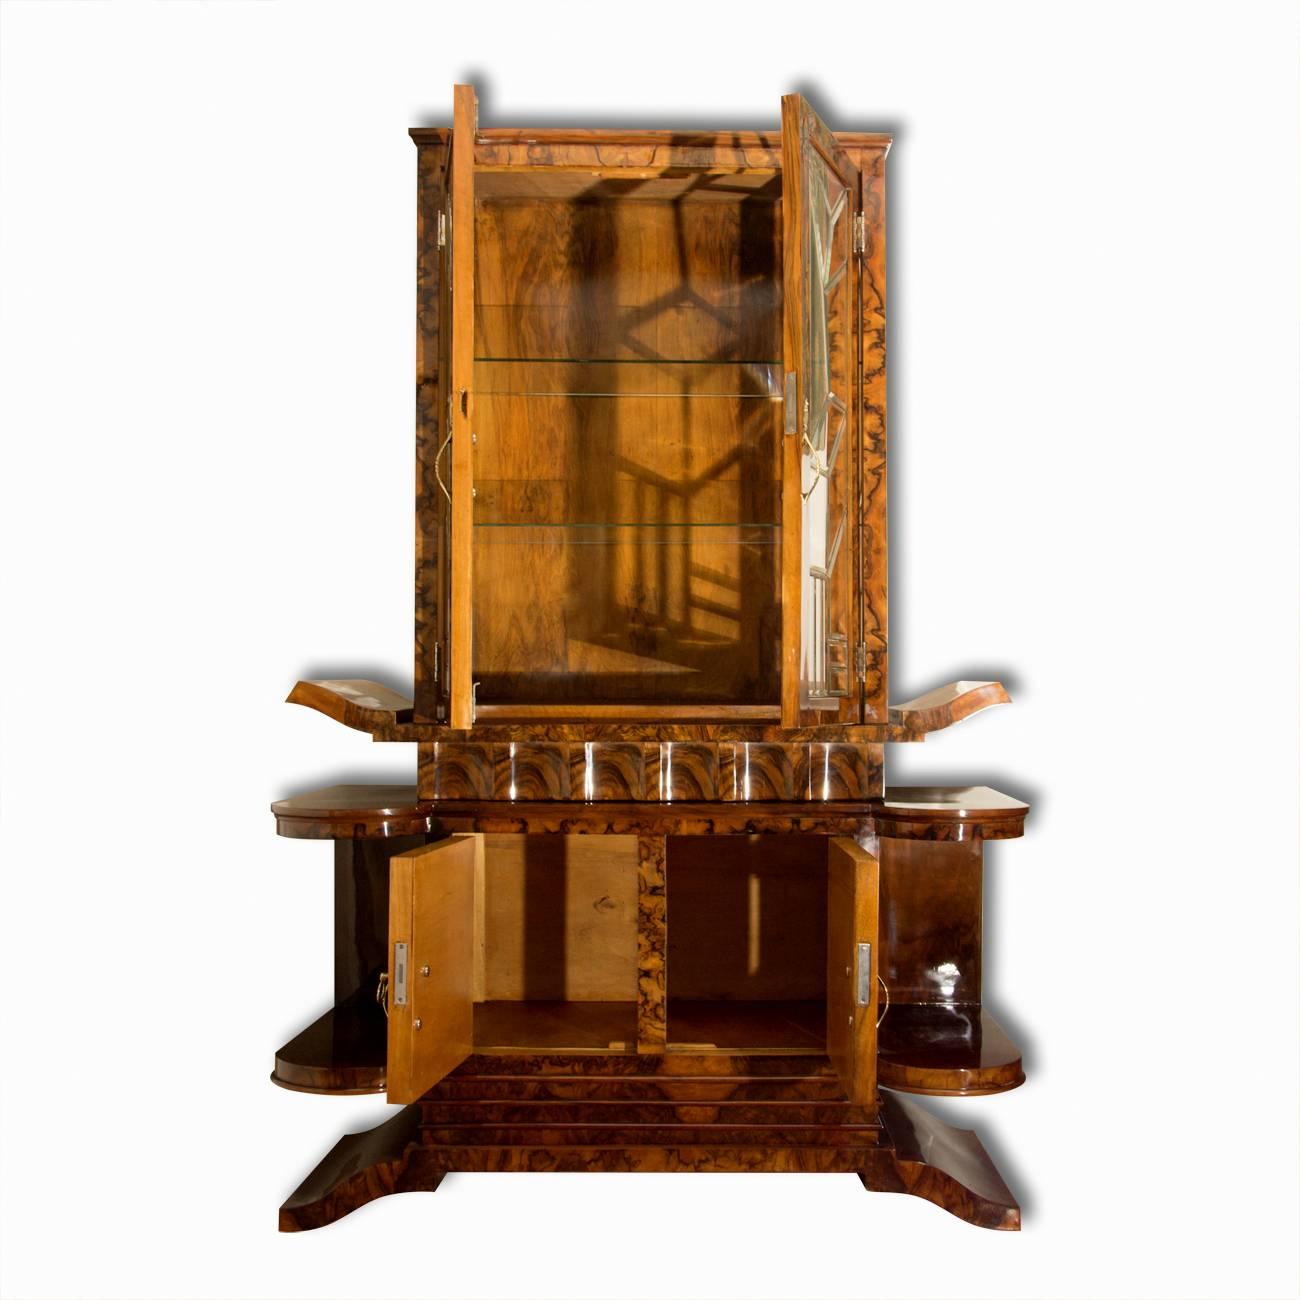 This Italian Art Deco showcase is veneered in walnut. It was designed and manufactured in the 1930s. The cabinet was designed in the context of the Italian pre-war design school. The cabinet has inlaid glass, rounded but also irregular edges. It